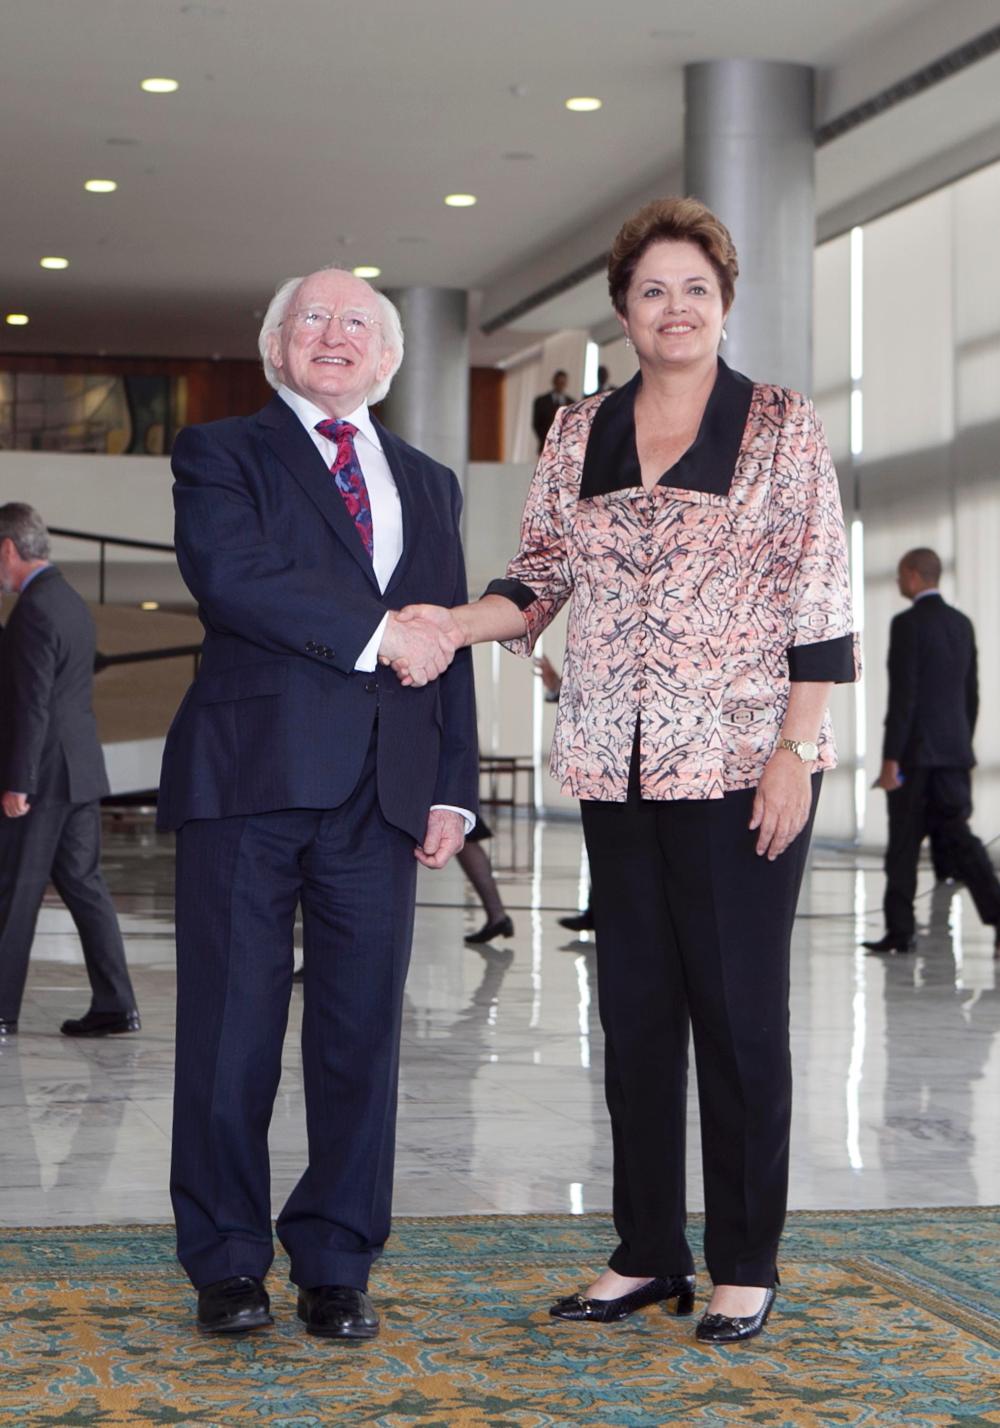 President arriving at the Office of Brazilian President H.E Dilma Rousseff